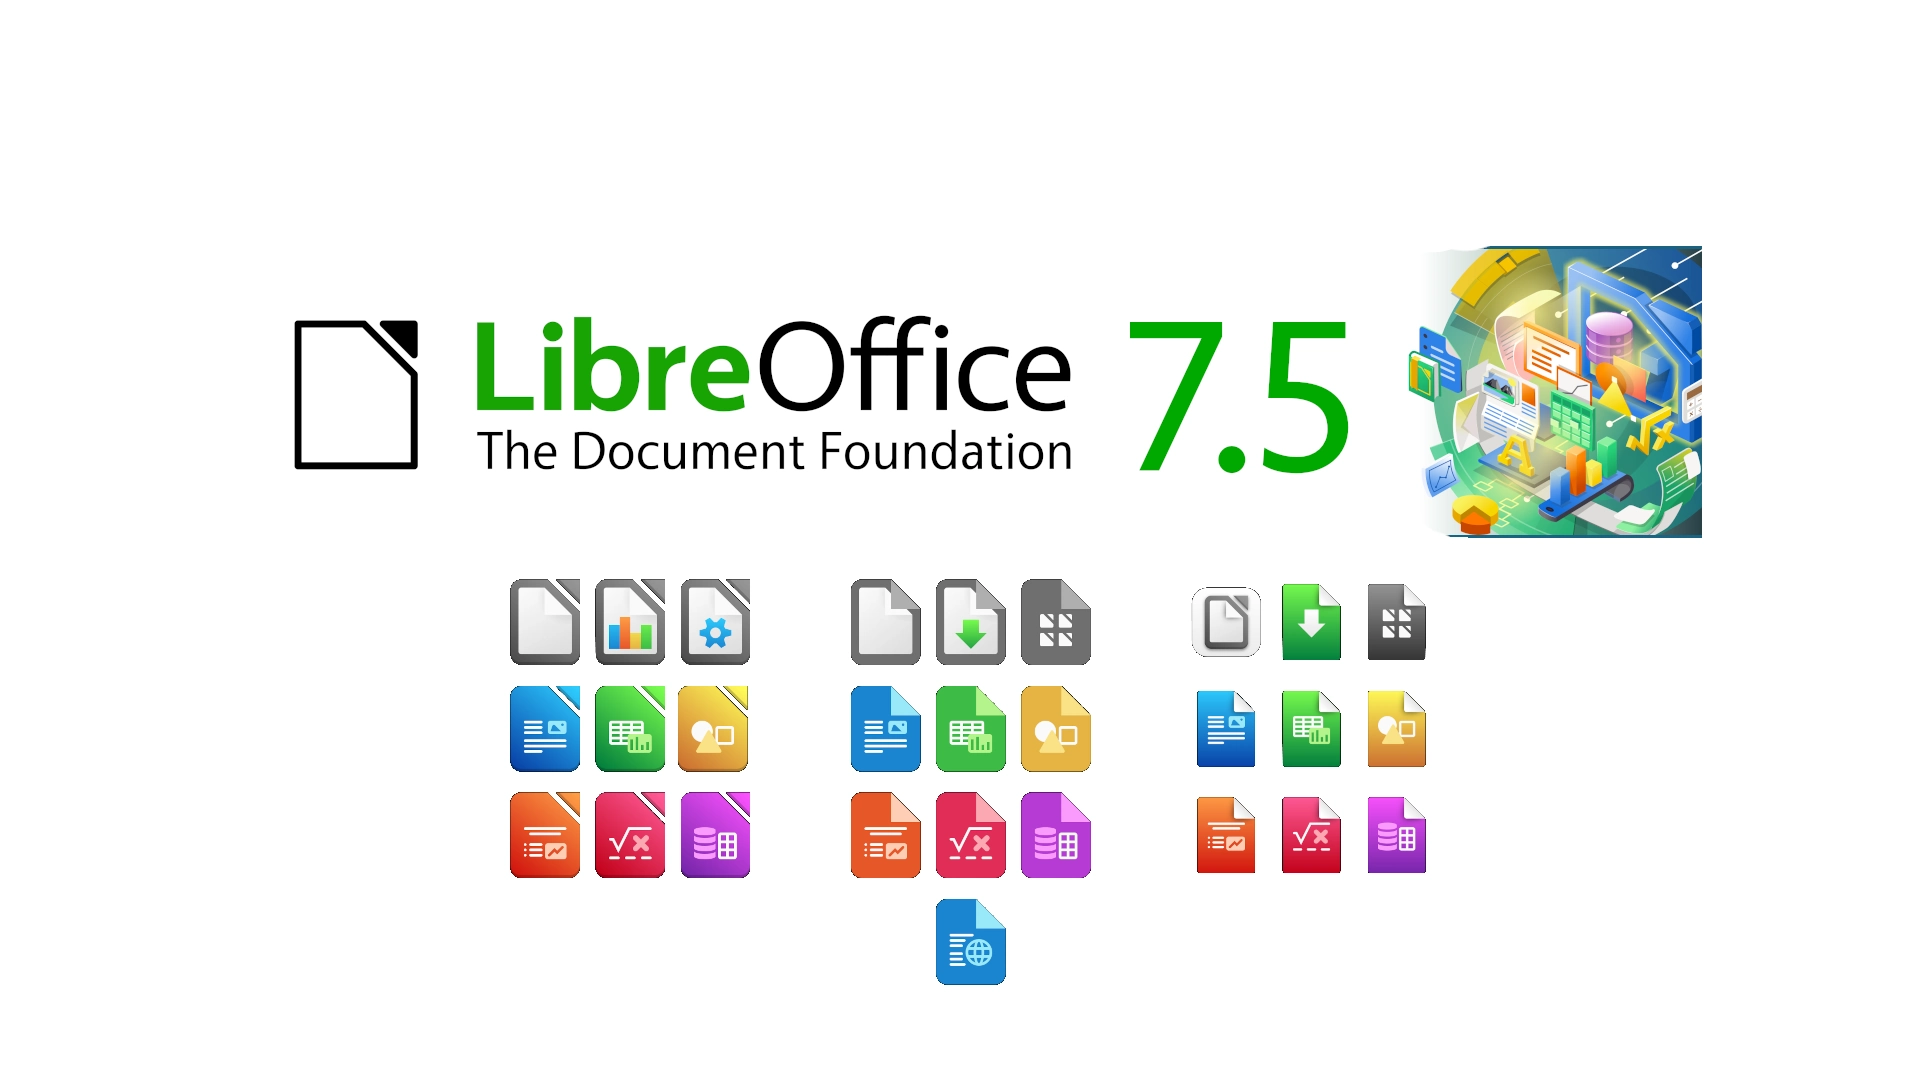 LibreOffice 7.5.6 Office Suite Released with More Than 50 Bug Fixes